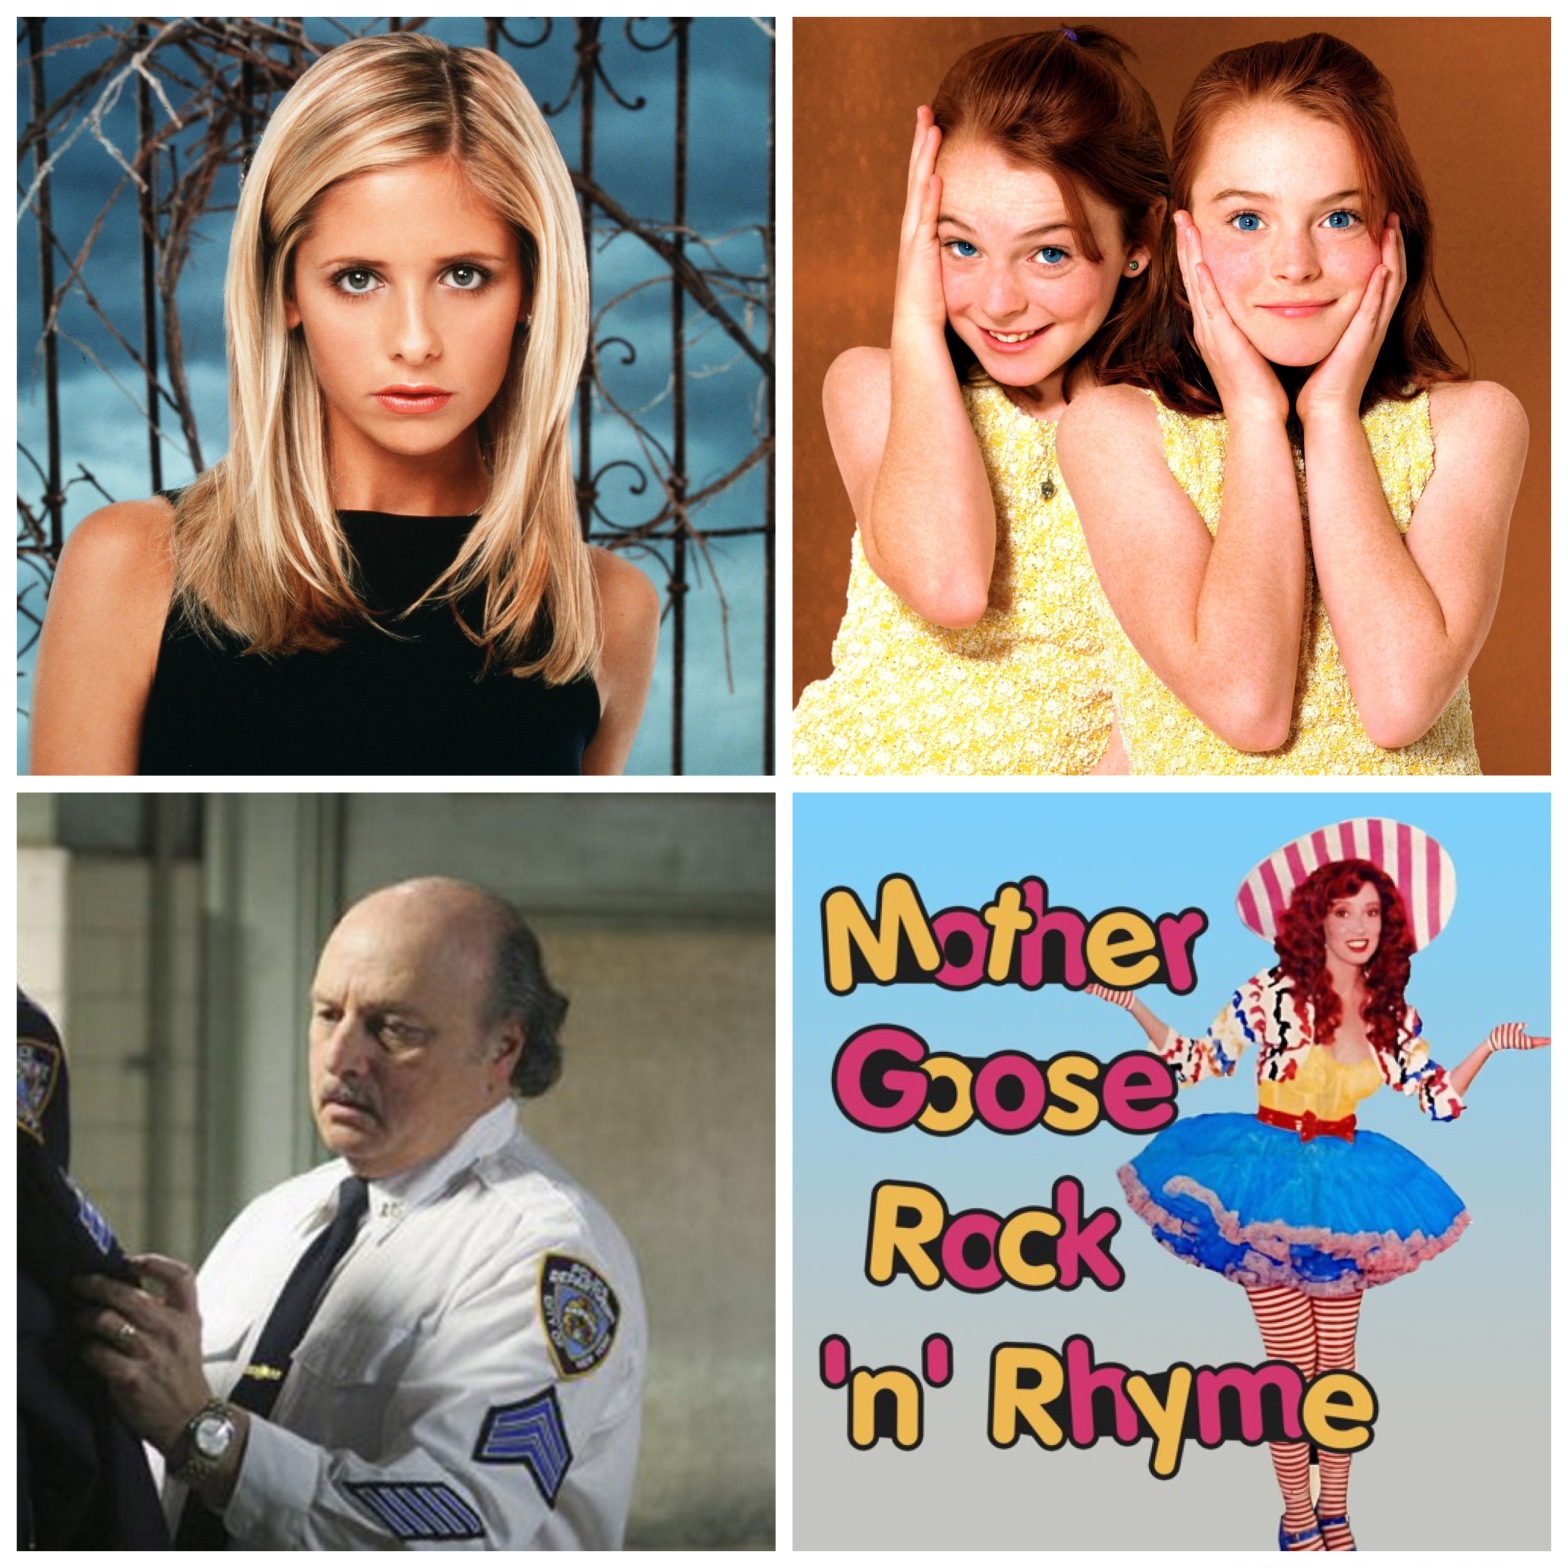 Sarah Michelle Gellar. Lindsay Lohan in The Parent Trap. The guy you think of when you hear NYPD Blue. And Shelley Duvall's Mother Goose Rock N Rhyme. All this will make sense when you listen to this week's podcast episode.